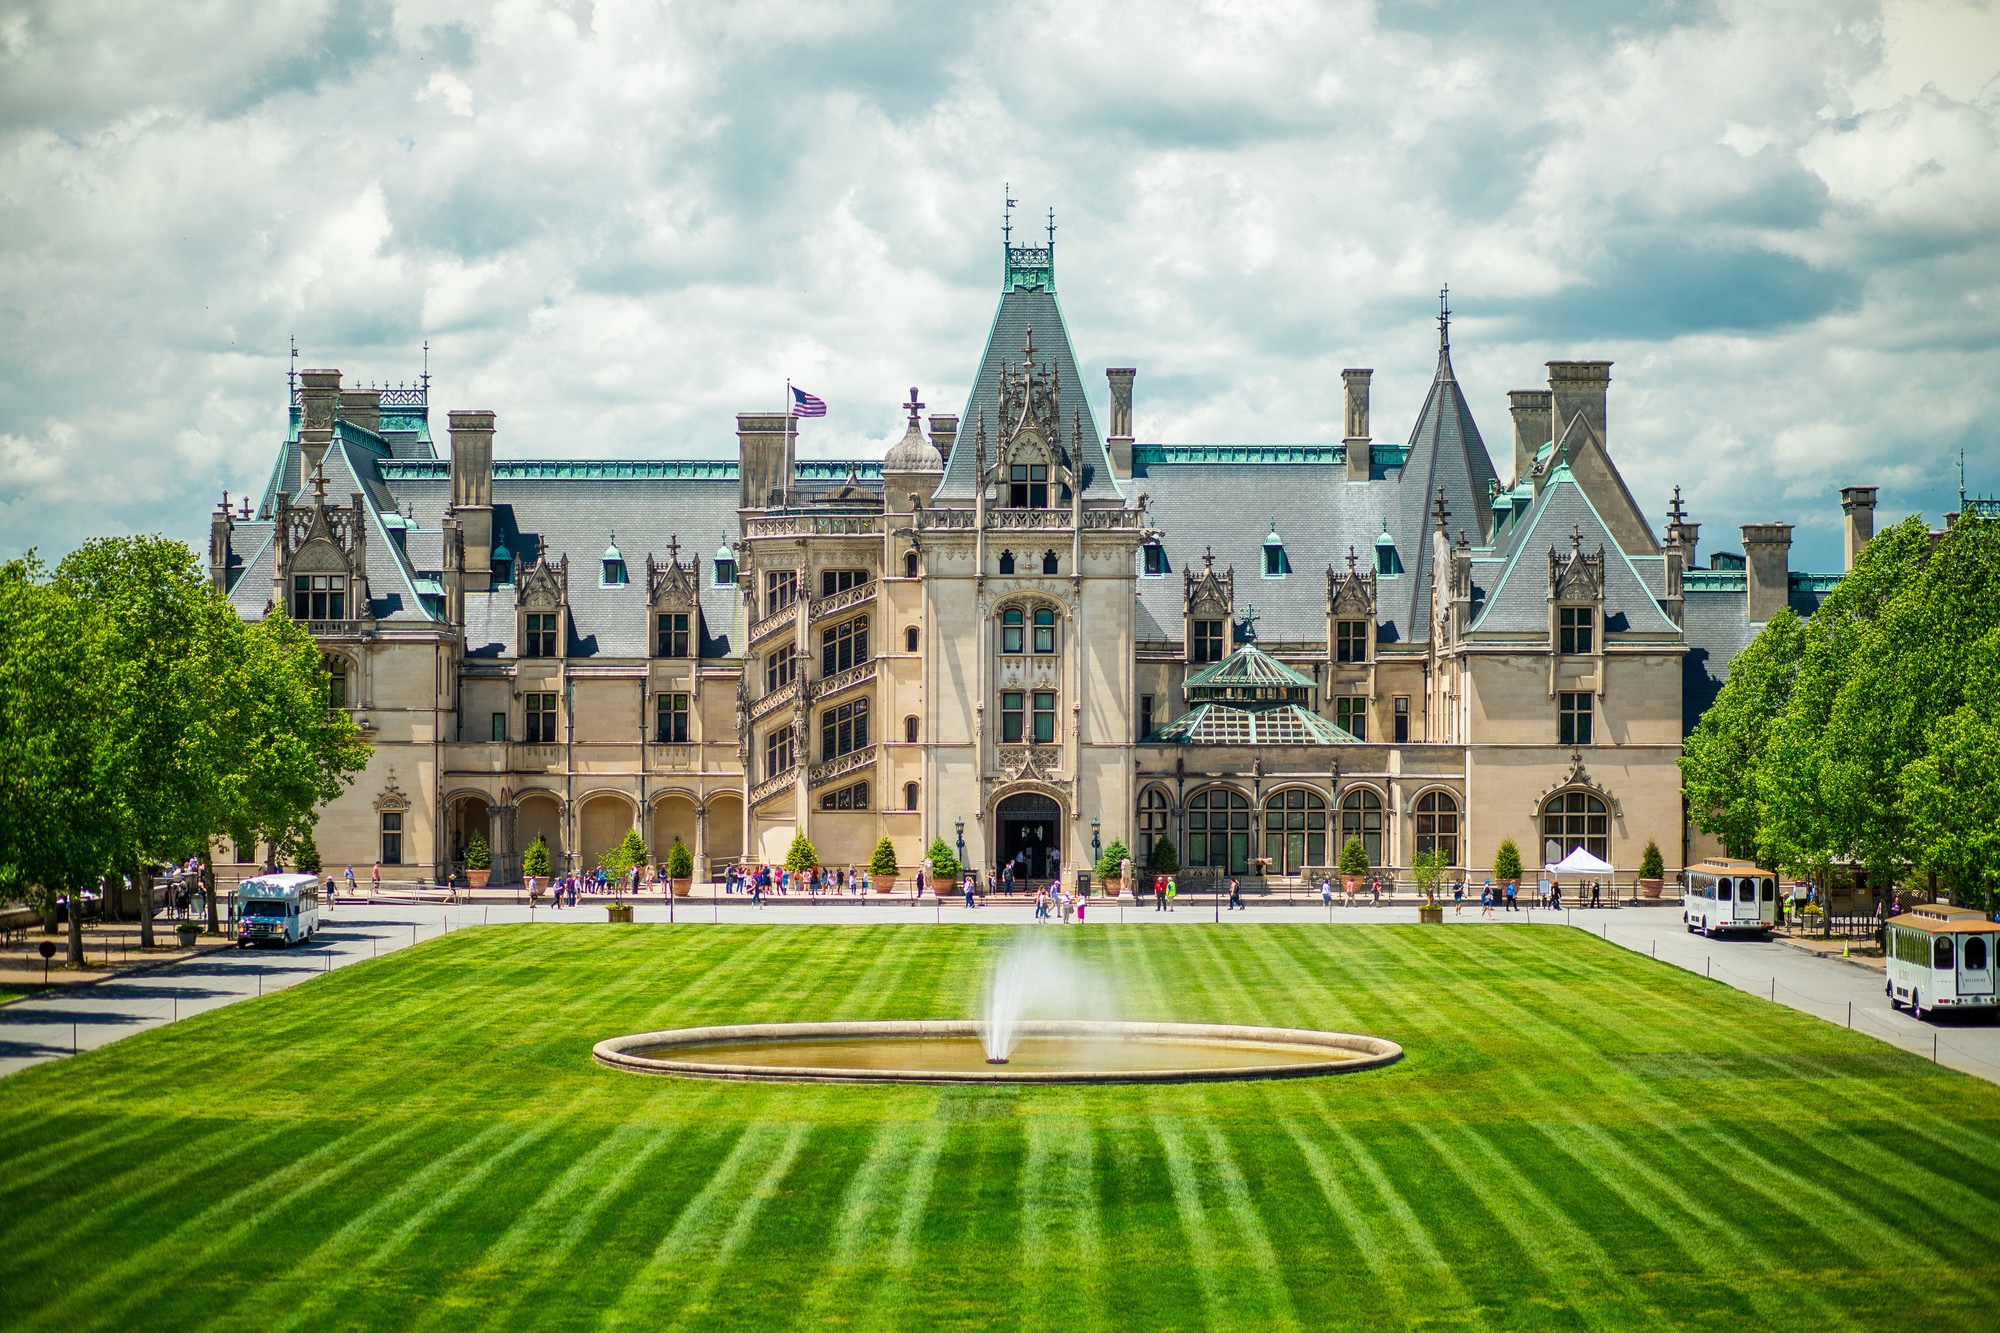 The front of the Biltmore Estate.